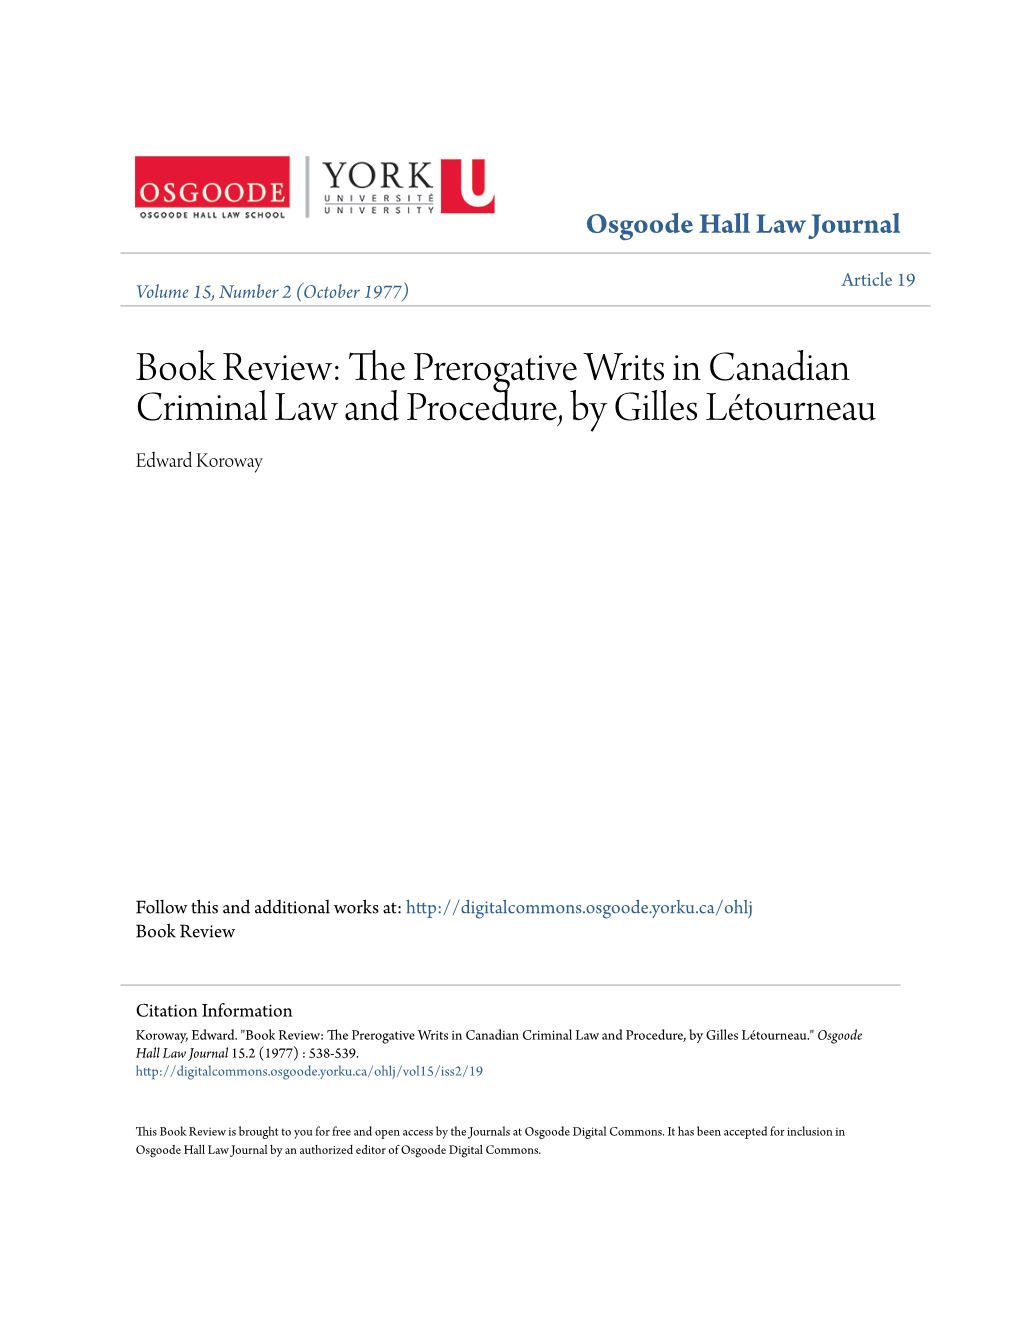 THE PREROGATIVE WRITS in CANADIAN CRIMINAL LAW and PROCEDURE, by GILLES Litournieau